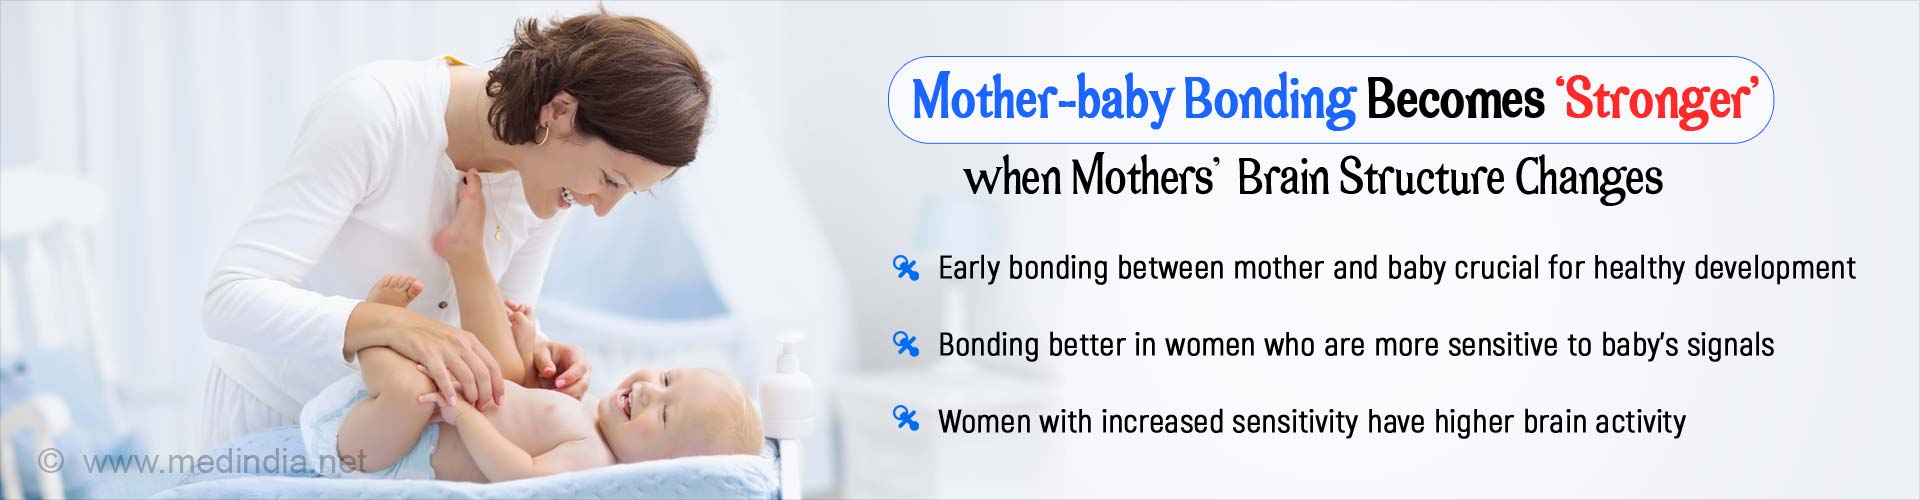 Mother-baby bonding becomes stronger when mothers' brain structure changes. Early bonding between mother and baby crucial for healthy development. Bonding better in women who are more sensitive to baby's signals. Women with increased sensitivity have higher brain activity.